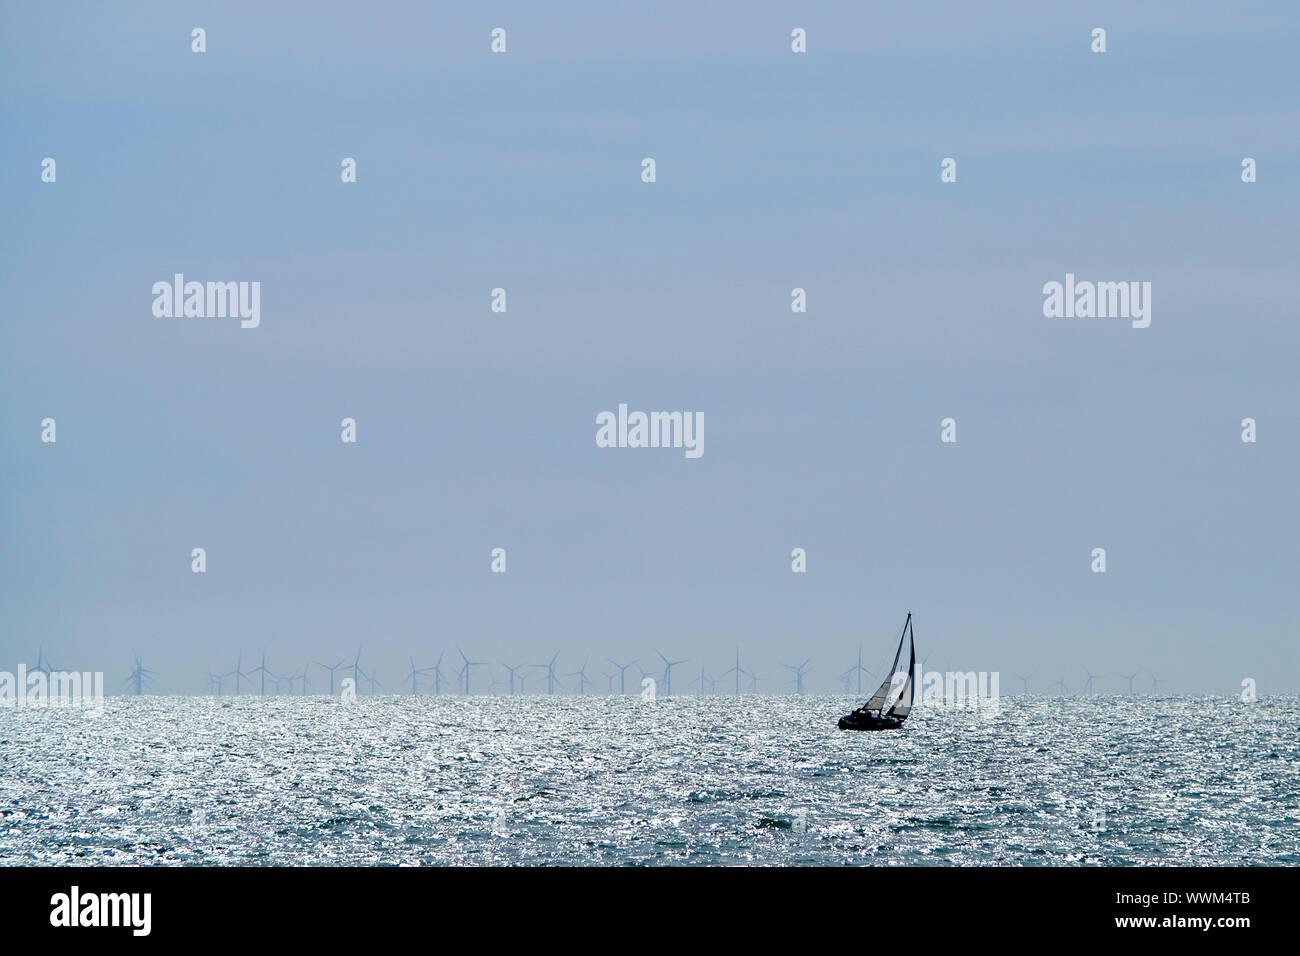 Sailing boat in front of Rampion offshore wind turbines in the English Channel. Stock Photo